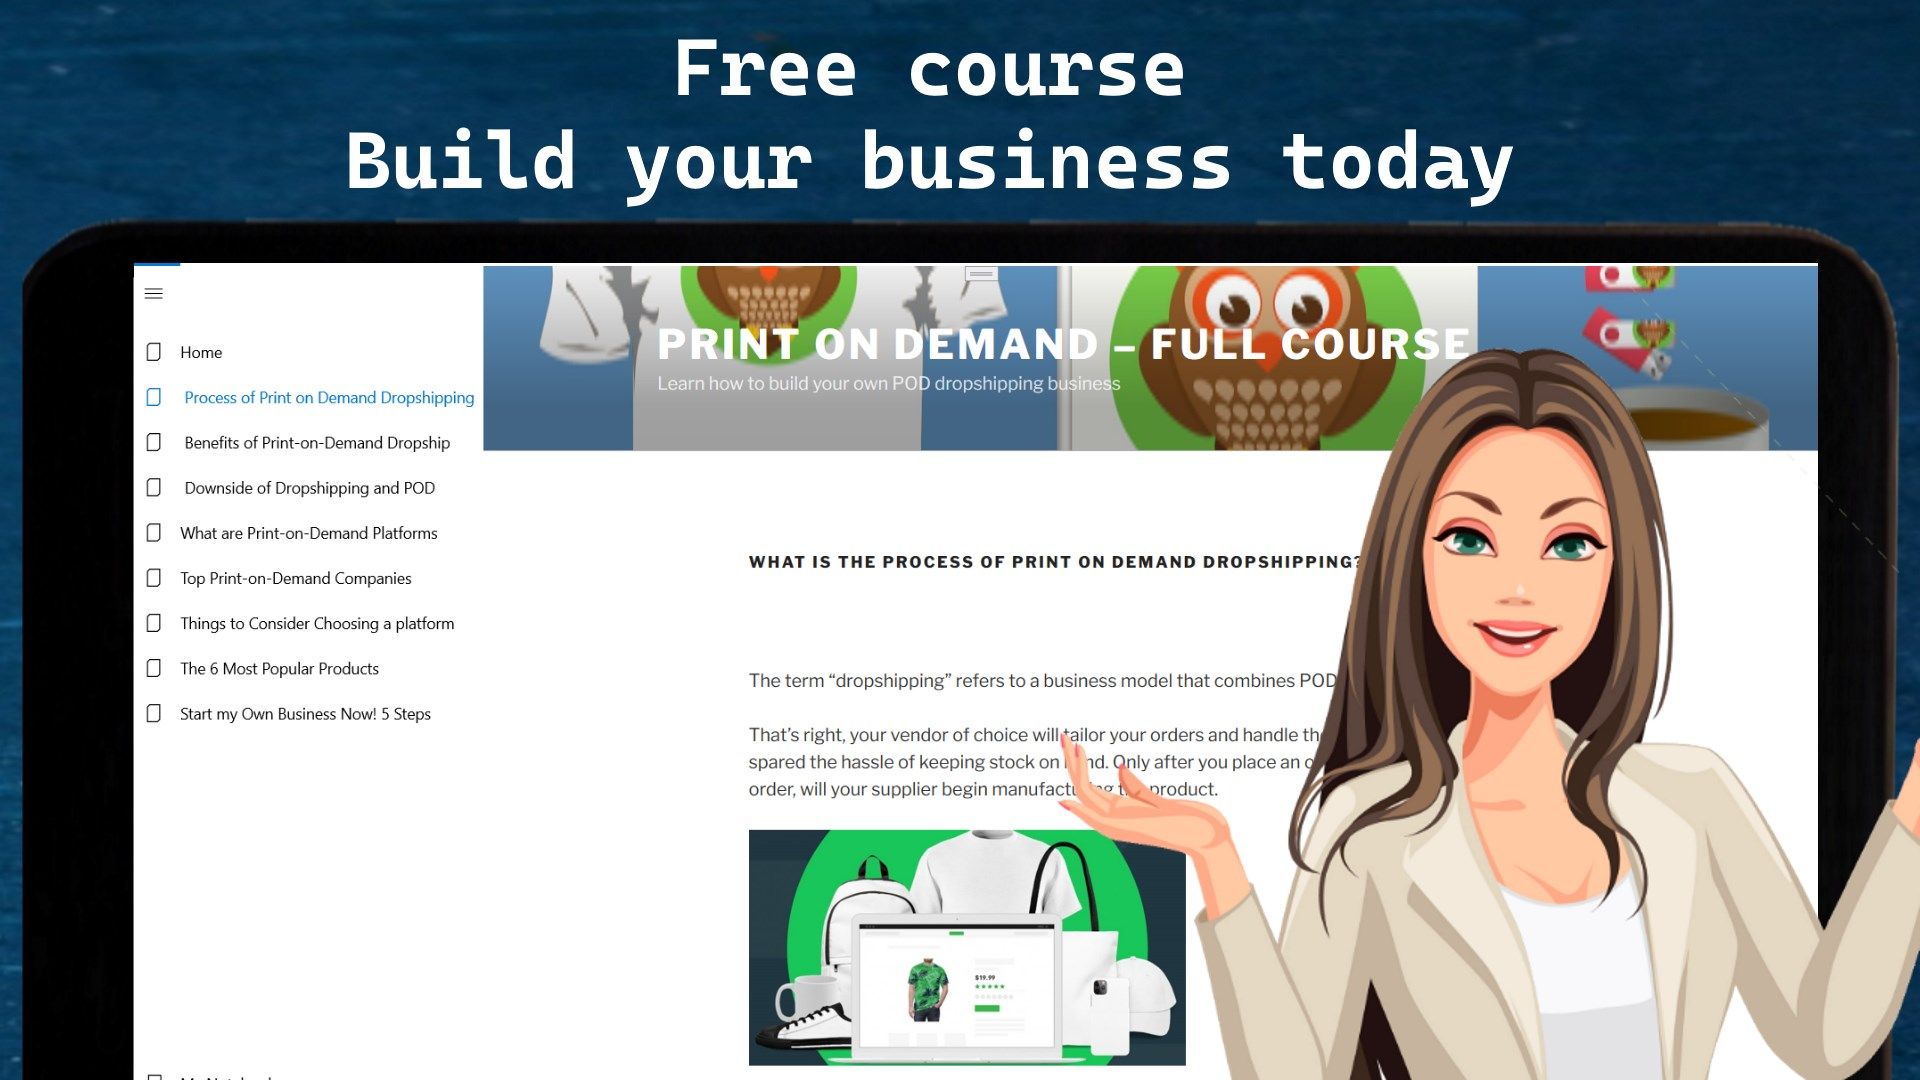 Print on demand dropshipping full course